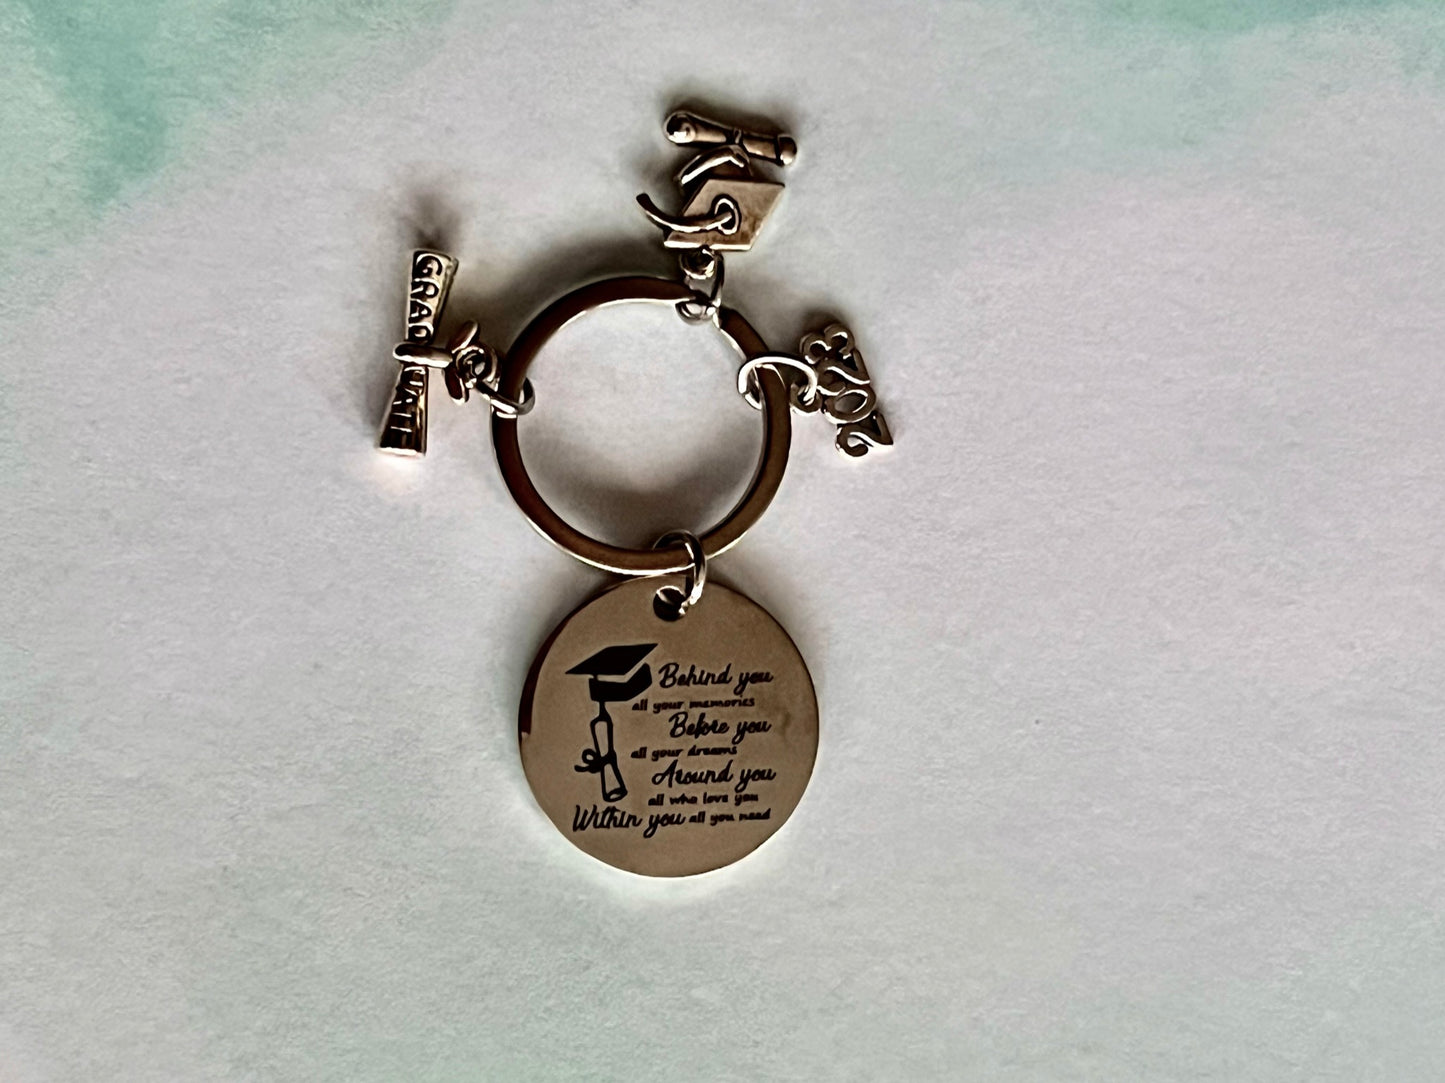 Graduation Keychain with charms - Behind You